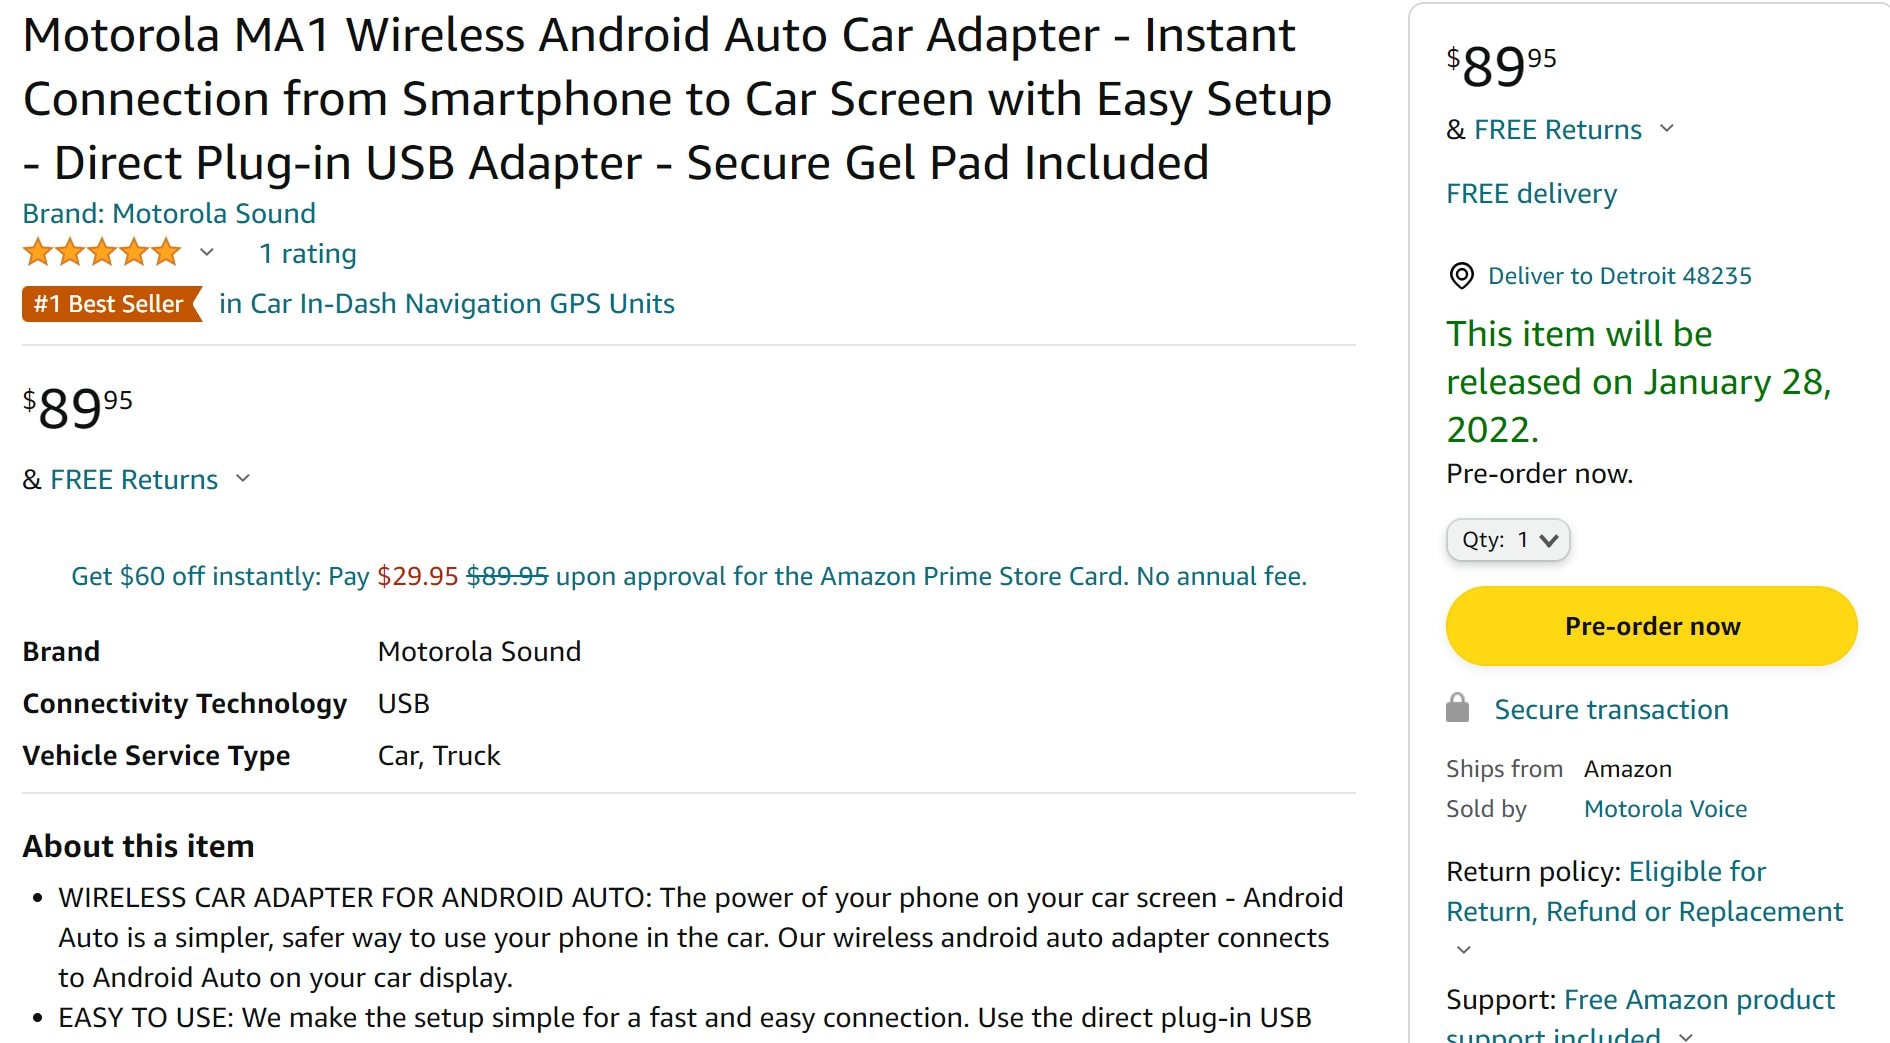 Motorola's Wireless Android Auto Adapter Finally Up for Grabs, Get